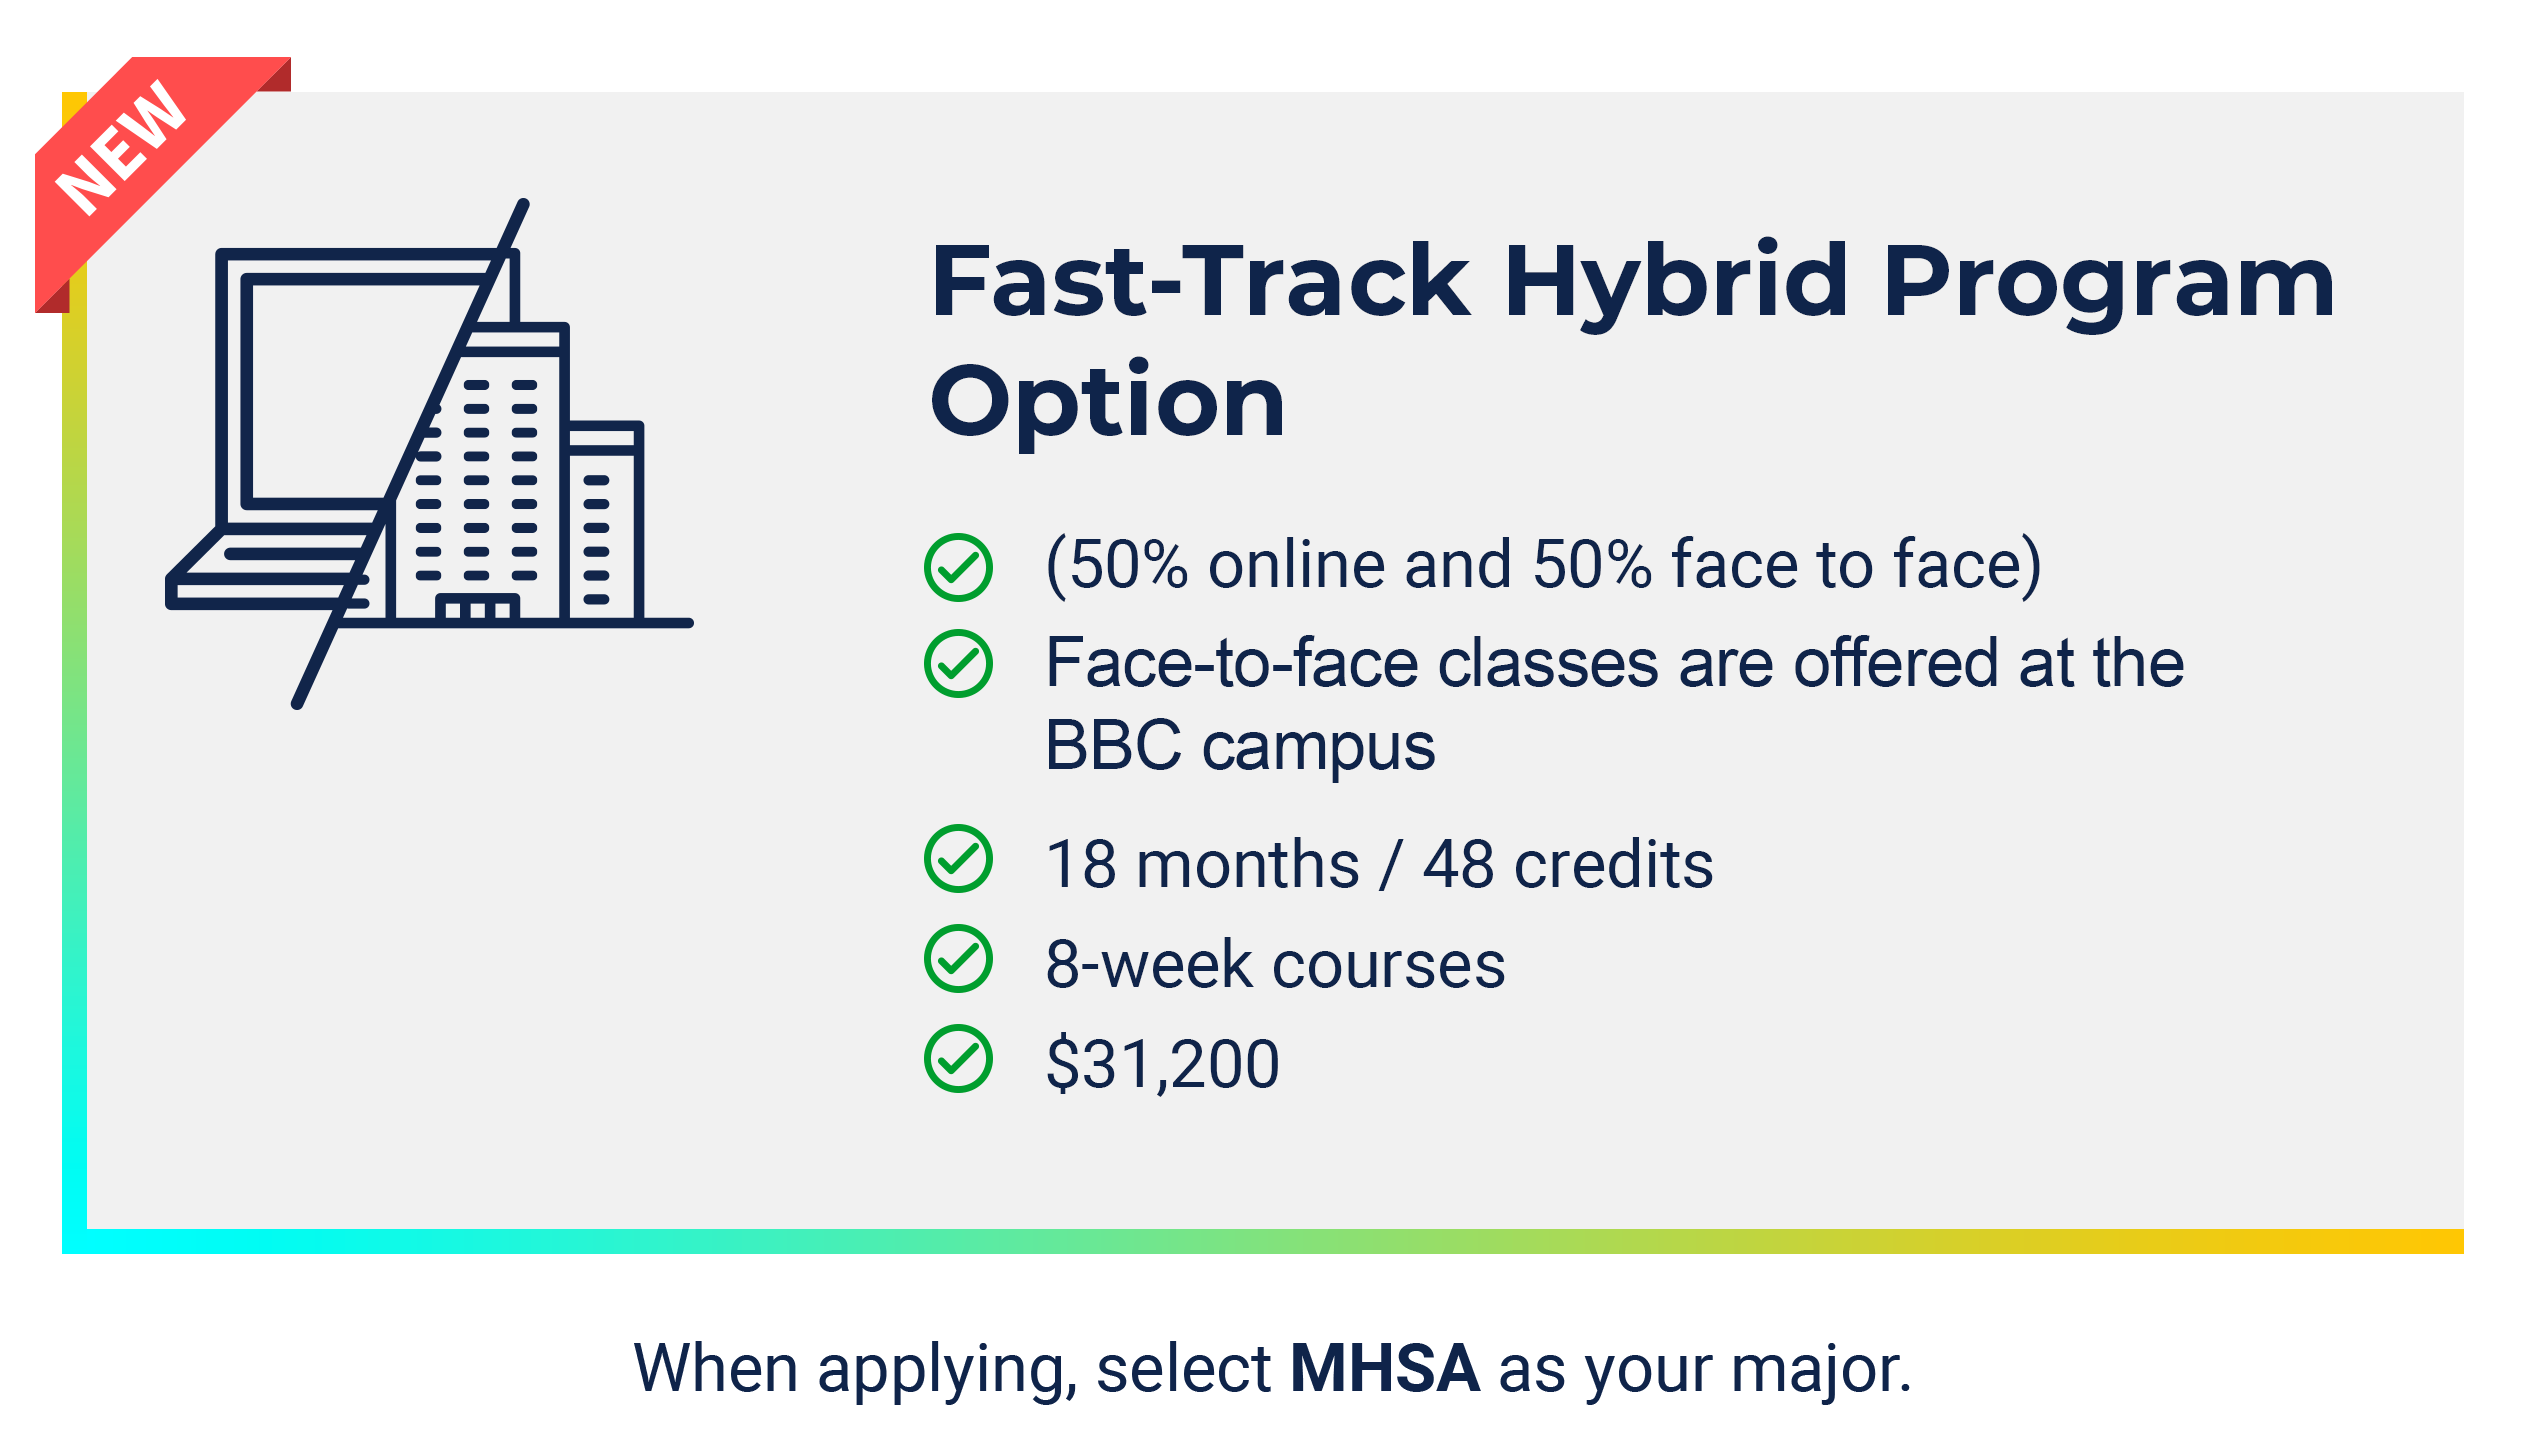 Fast Track Hybrid Program Option: - 50% online and 50% face to face - Face to face classes will be split between the MMC and the BBC cam[uses - 18 months/48 credits - 8 week courses - $31,200. When applying, select MHSA as your major.